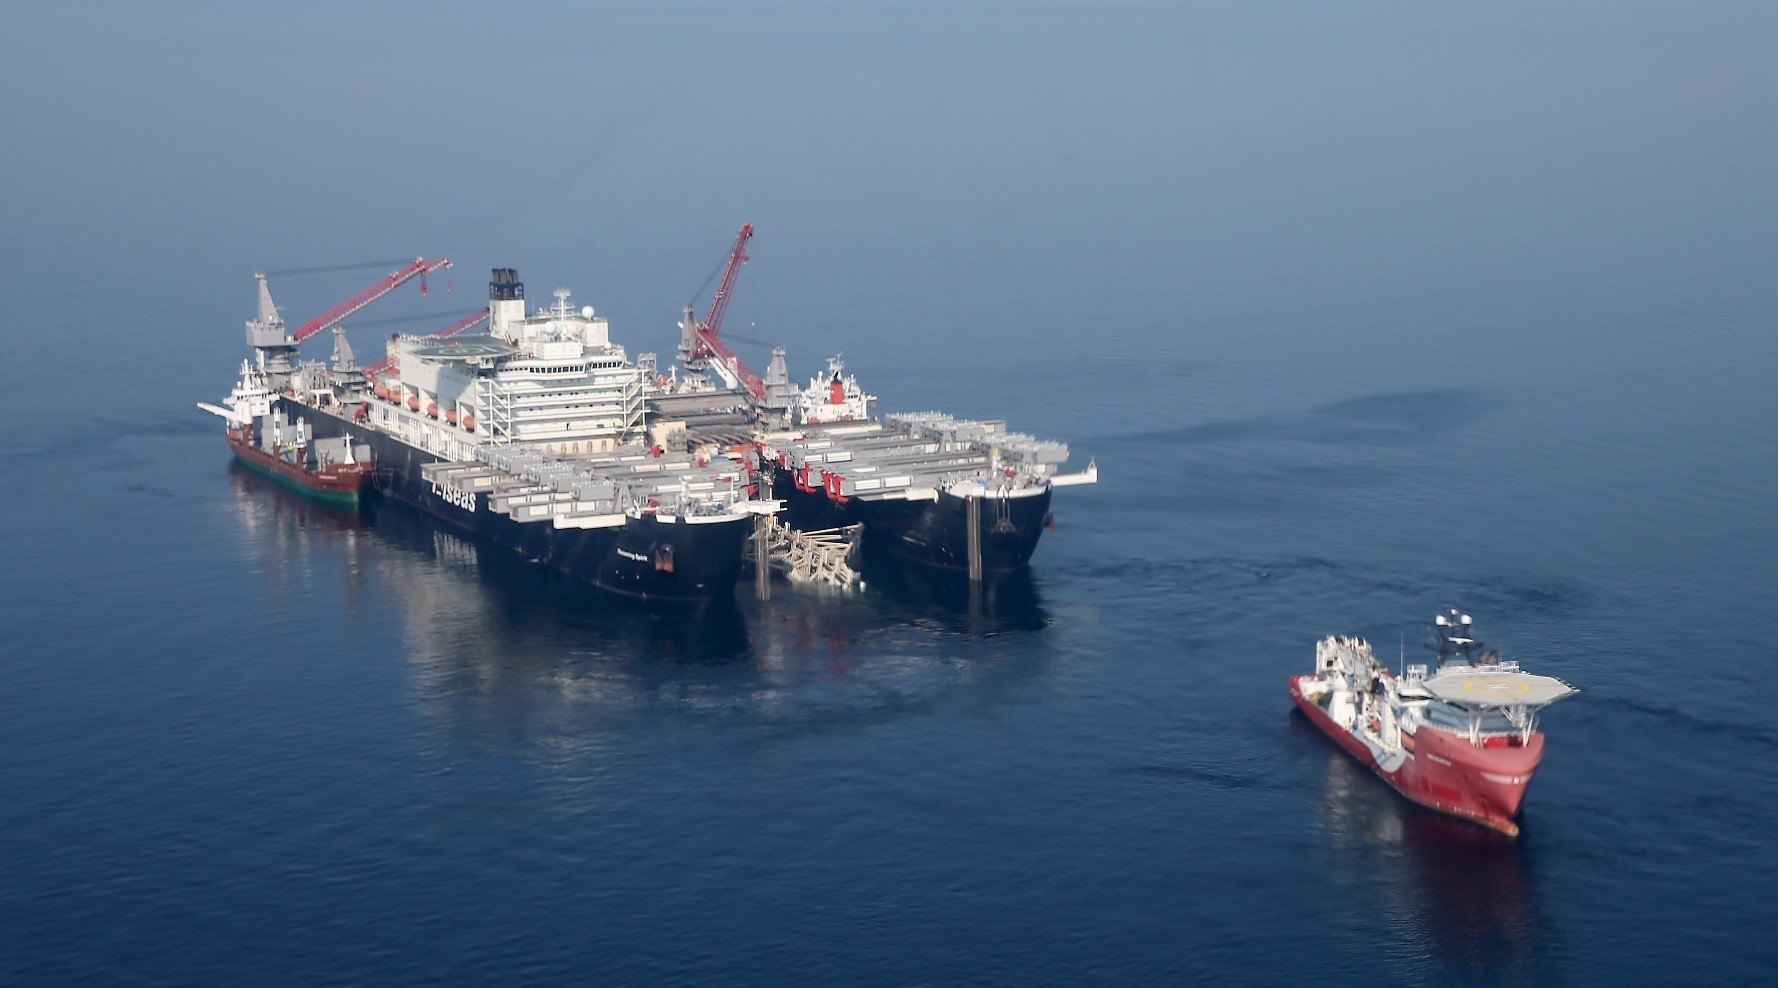 The world's largest construction vessel, Pioneering Spirit, is now cruising to the Black Sea in order to finish the deep-water construction of the second offshore line of TurkStream.